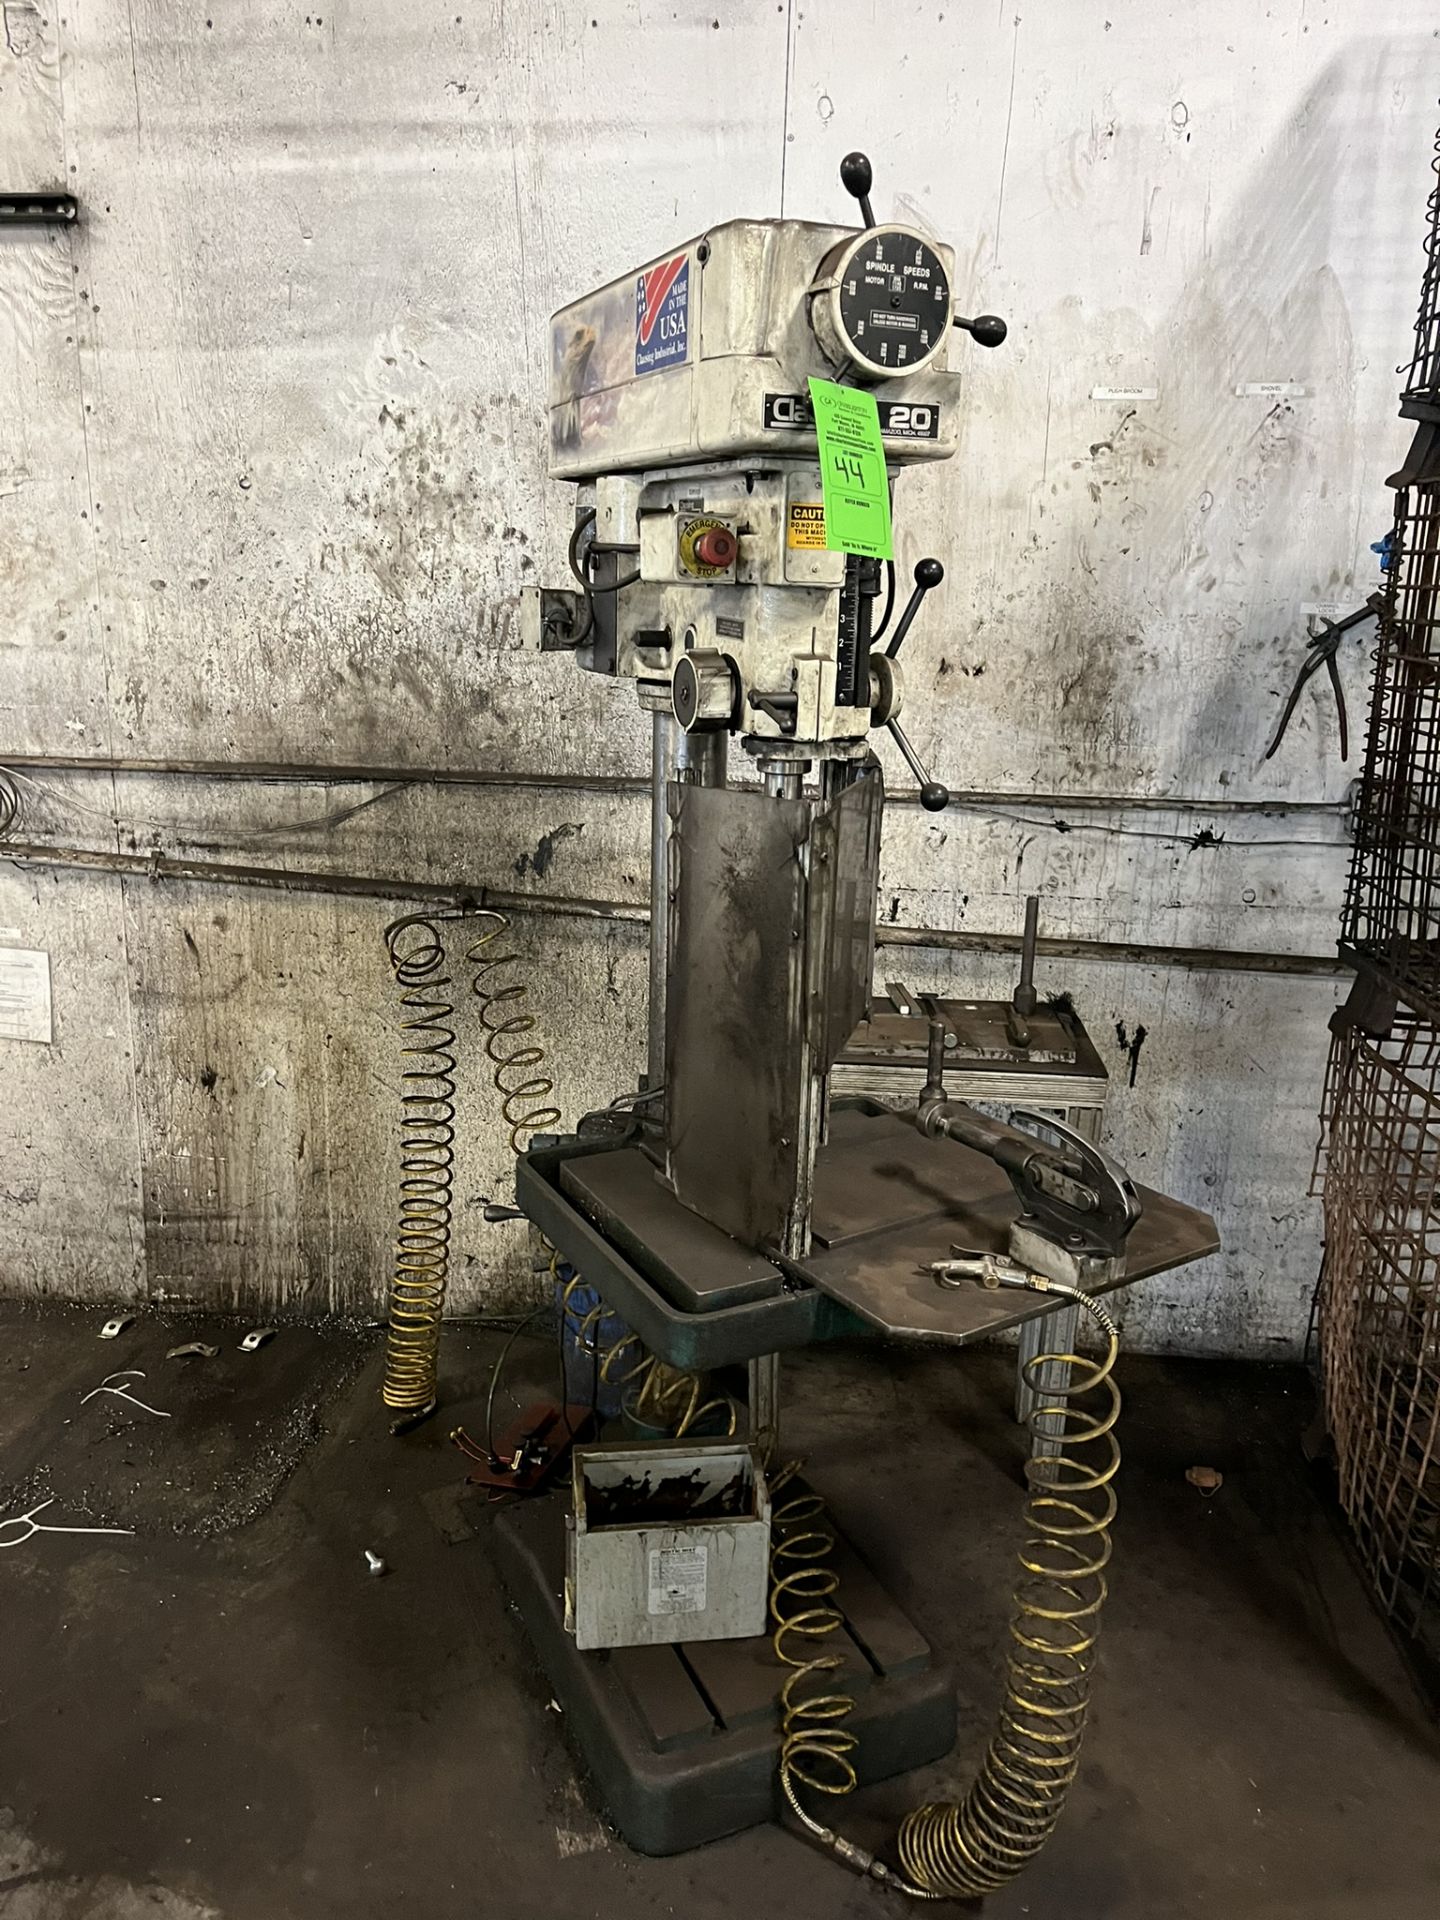 CLAUSING 20 SINGLE SPINDLE DRILL PRESS MODEL # 2272 1.5 HP SERIAL # 2M01851